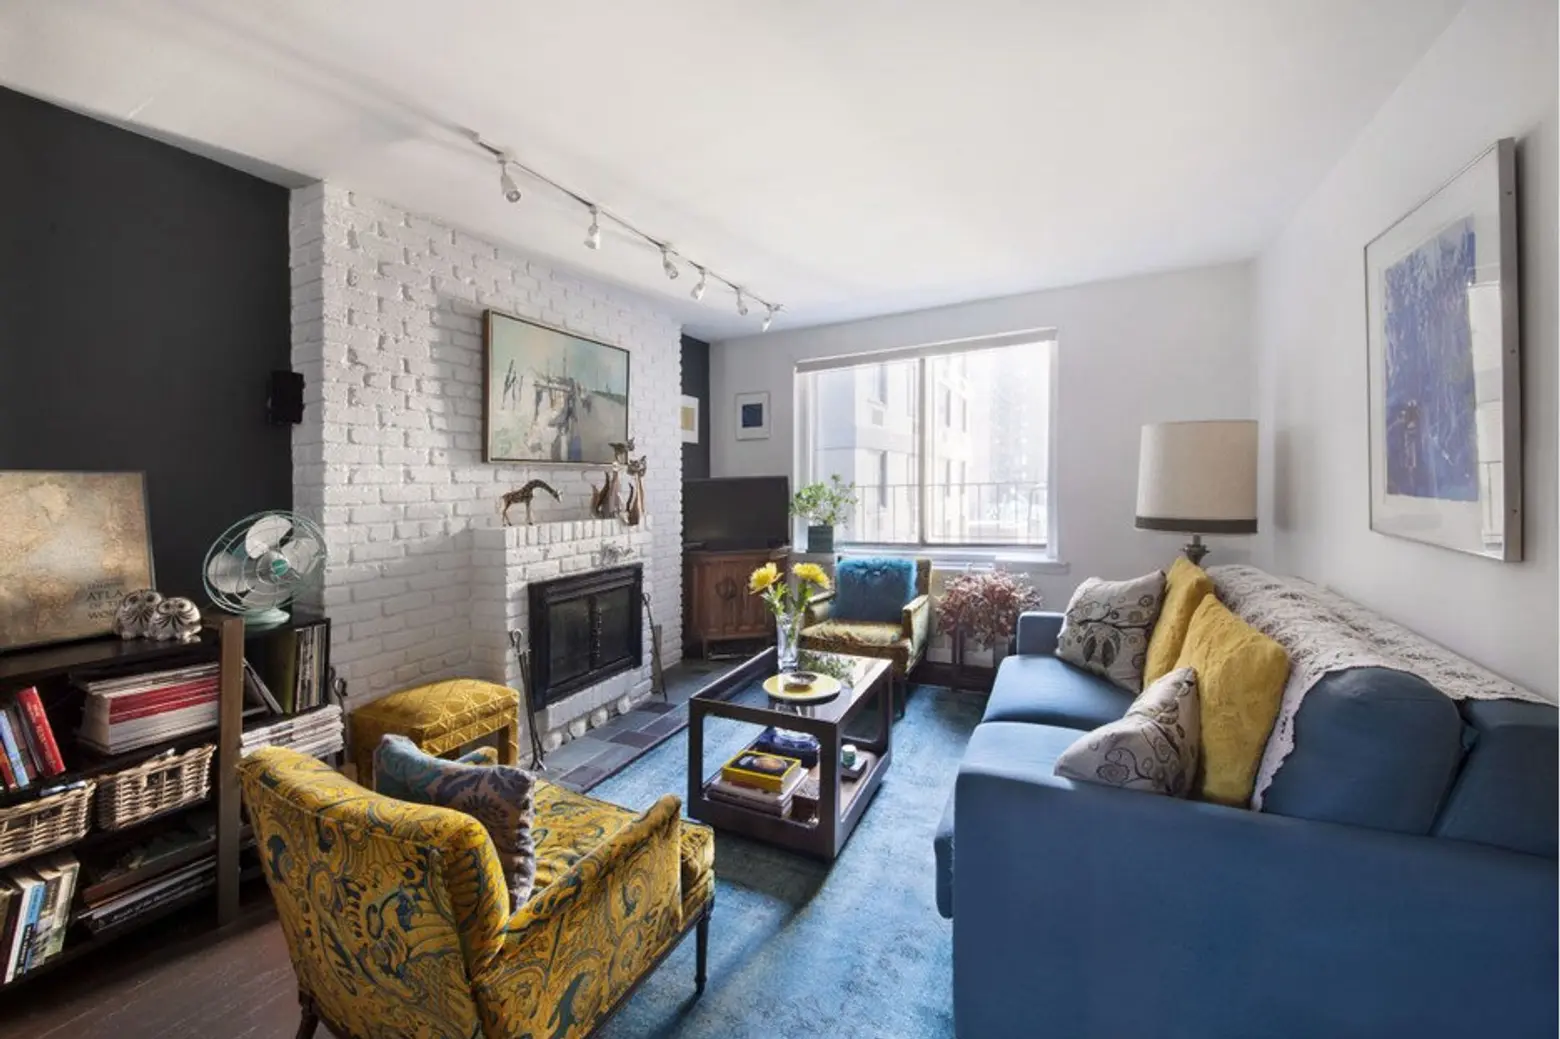 Charming, compact triplex with a roof deck asks less than $1M in Gramercy